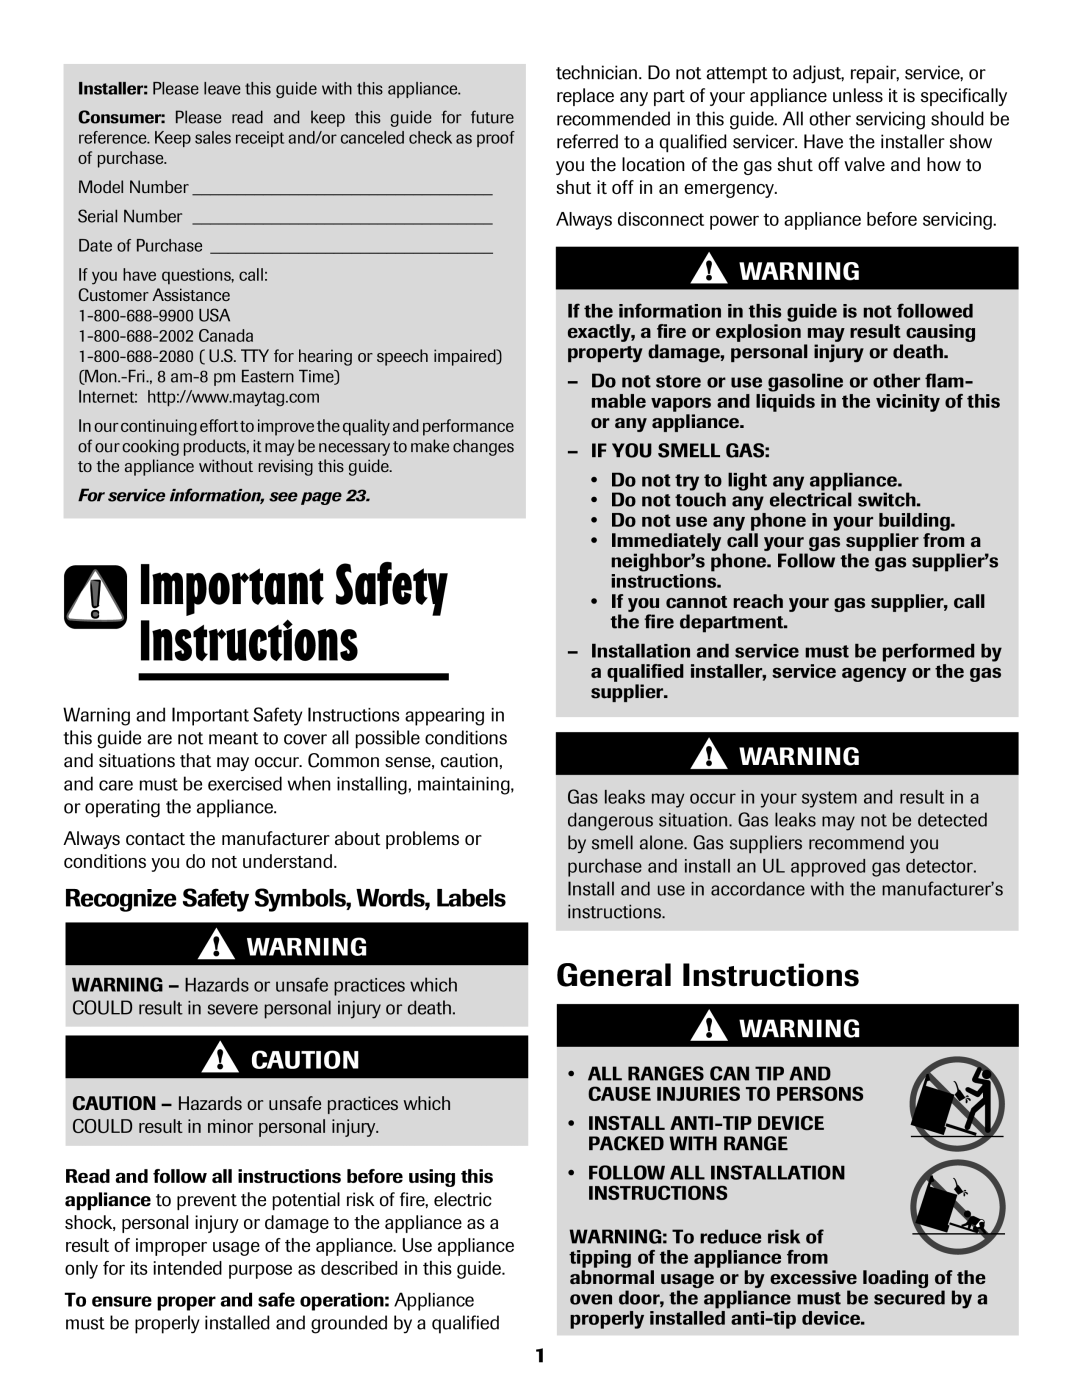 Maytag Gas - Precision Touch Control 500 Range important safety instructions Important Safety, General Instructions 